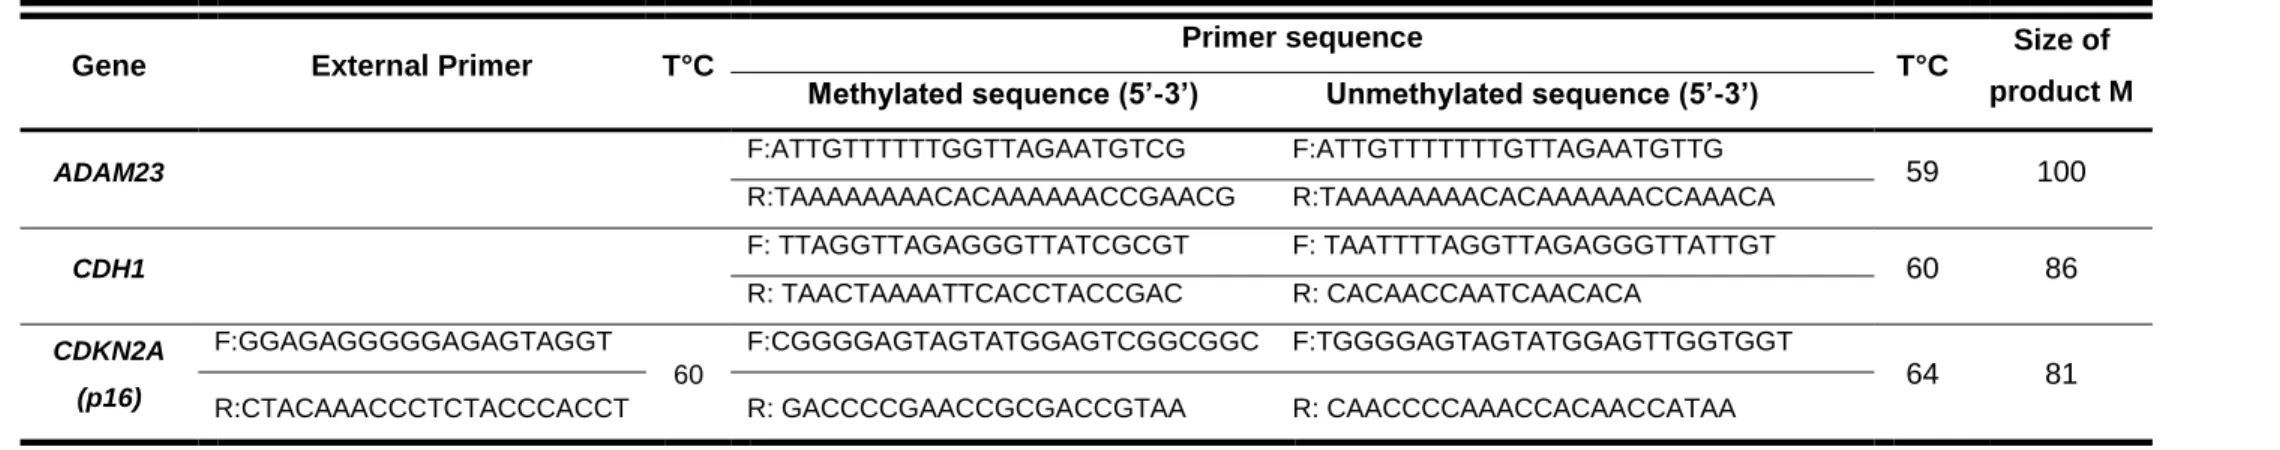 Table 2. Primer sequences used in methylation-speciﬁc polymerase chain reaction 